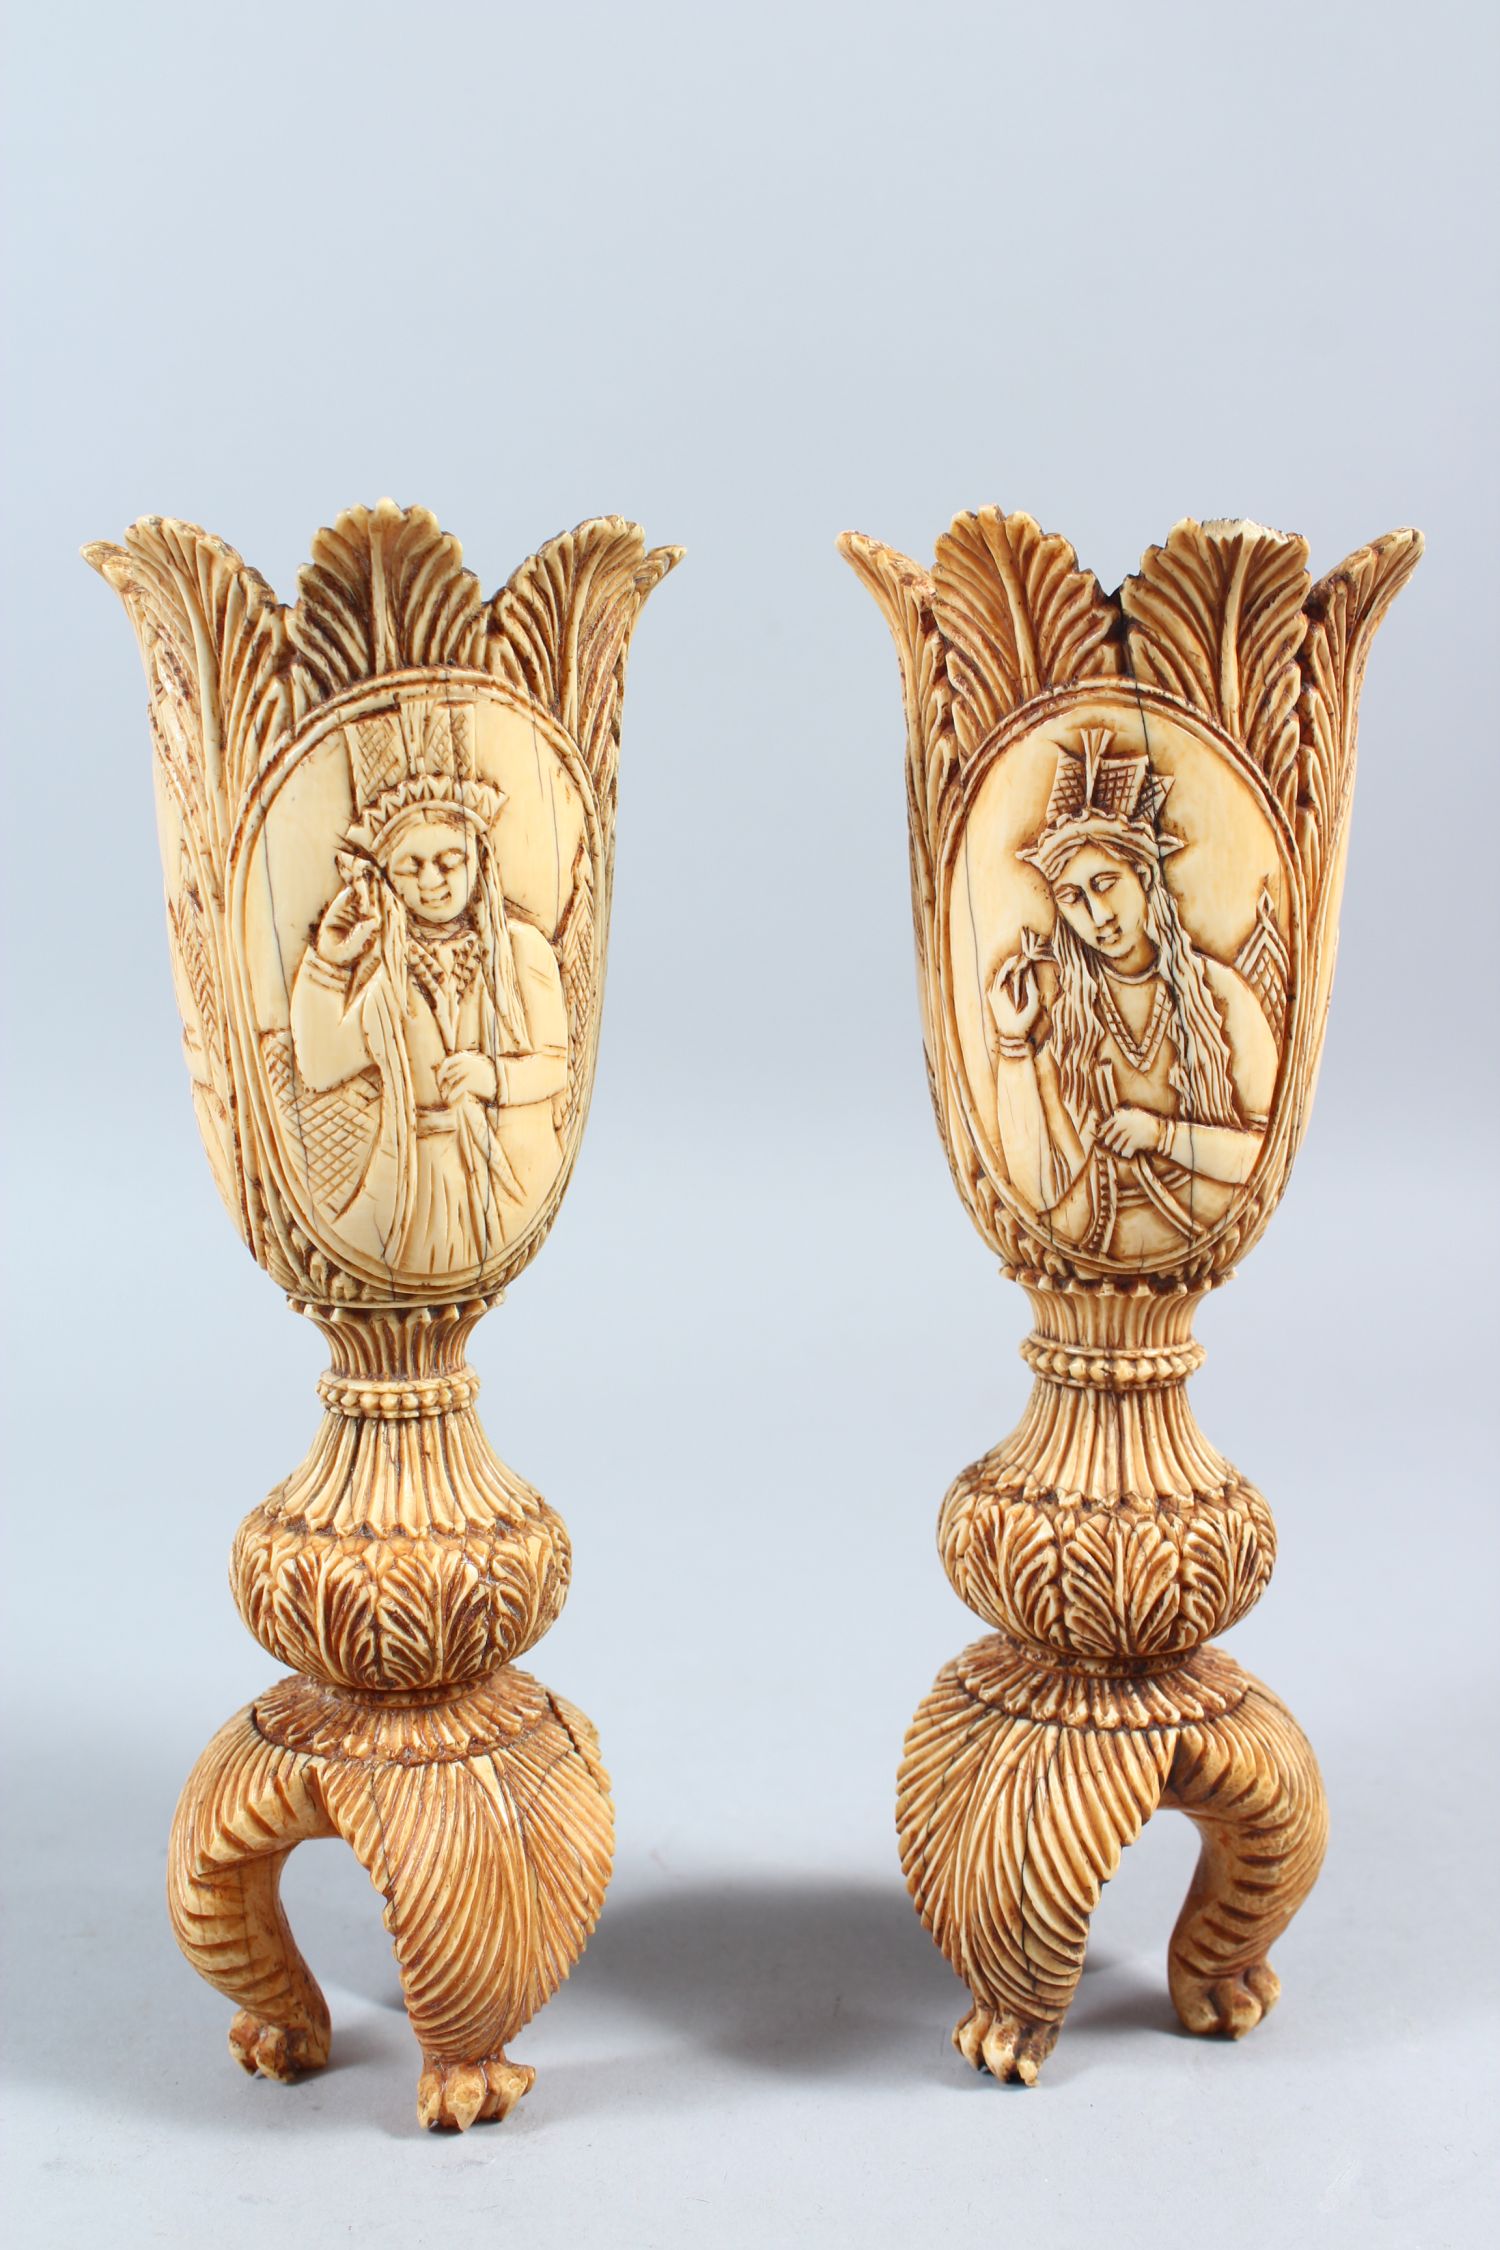 A PAIR OF 19TH CENTURY INDIAN CARVED IVORY TULIP SHAPED VASES, depicting Mughal rulers and consorts, - Image 2 of 8